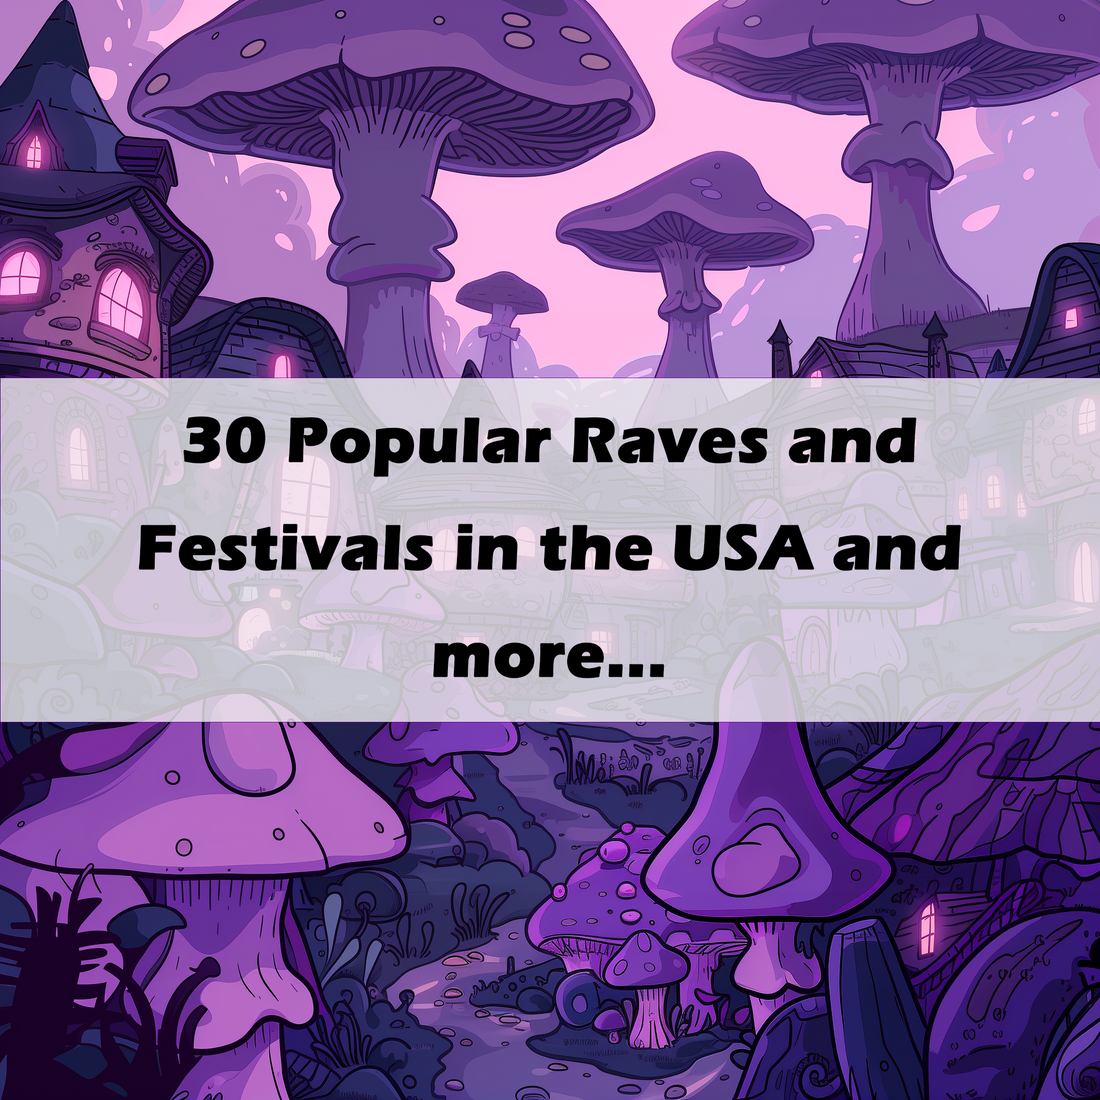 30 Popular Raves and Festivals in the USA and more...